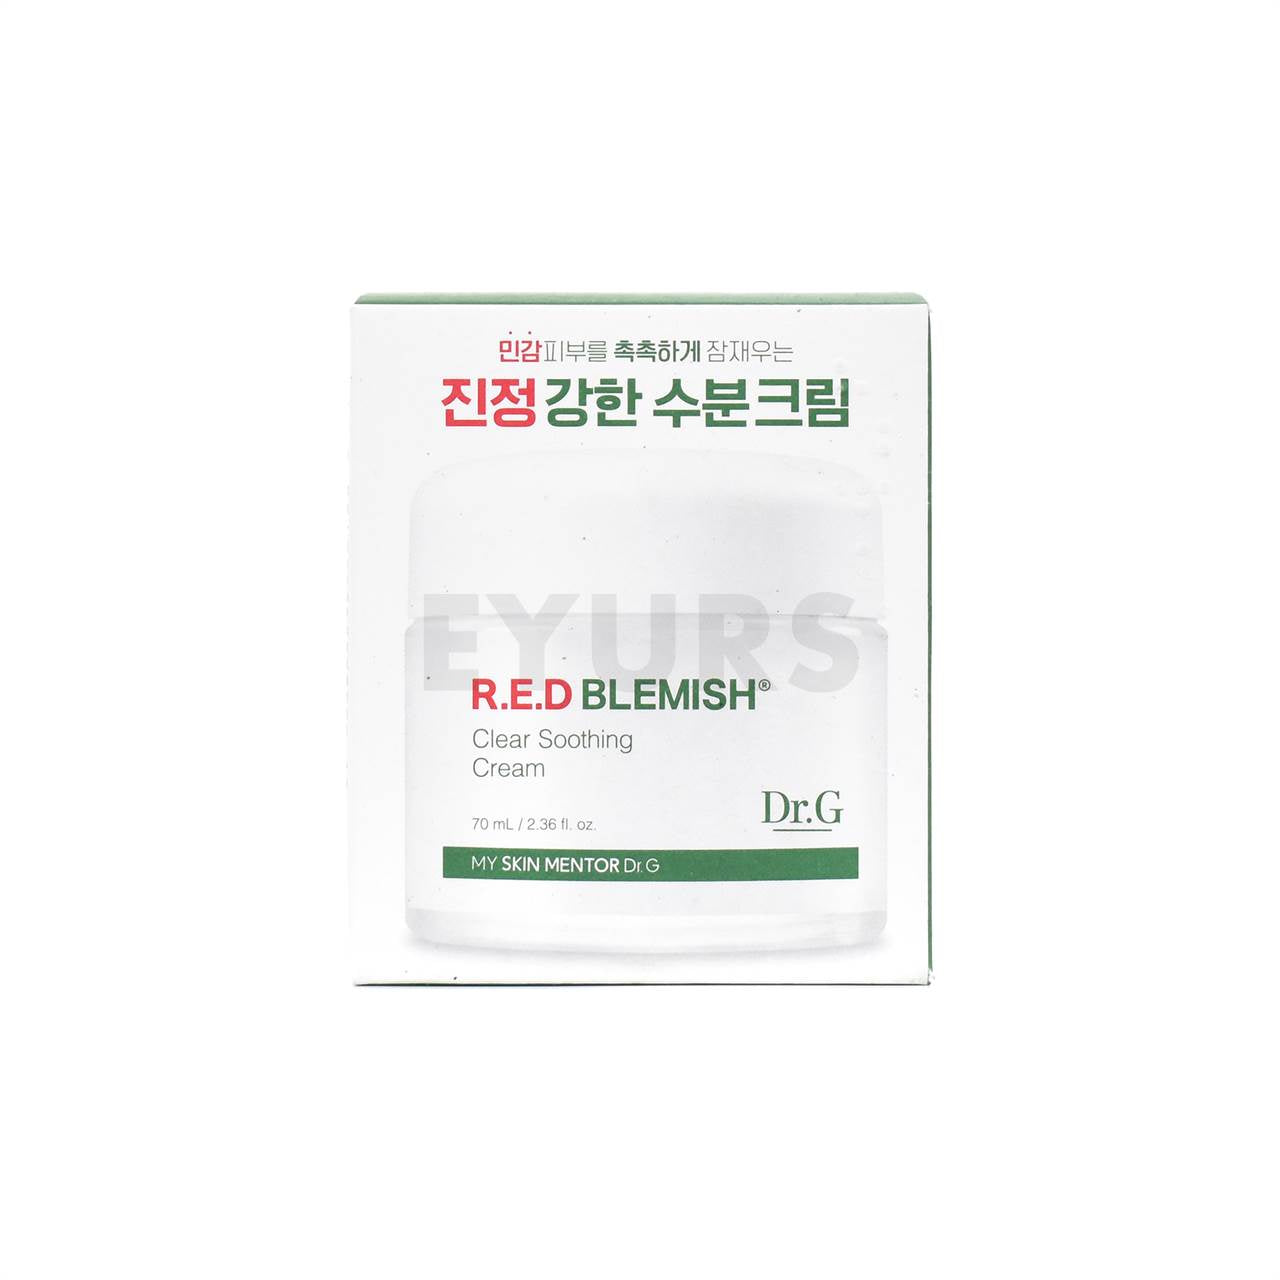 dr. g red blemish clear soothing cream front side packaging